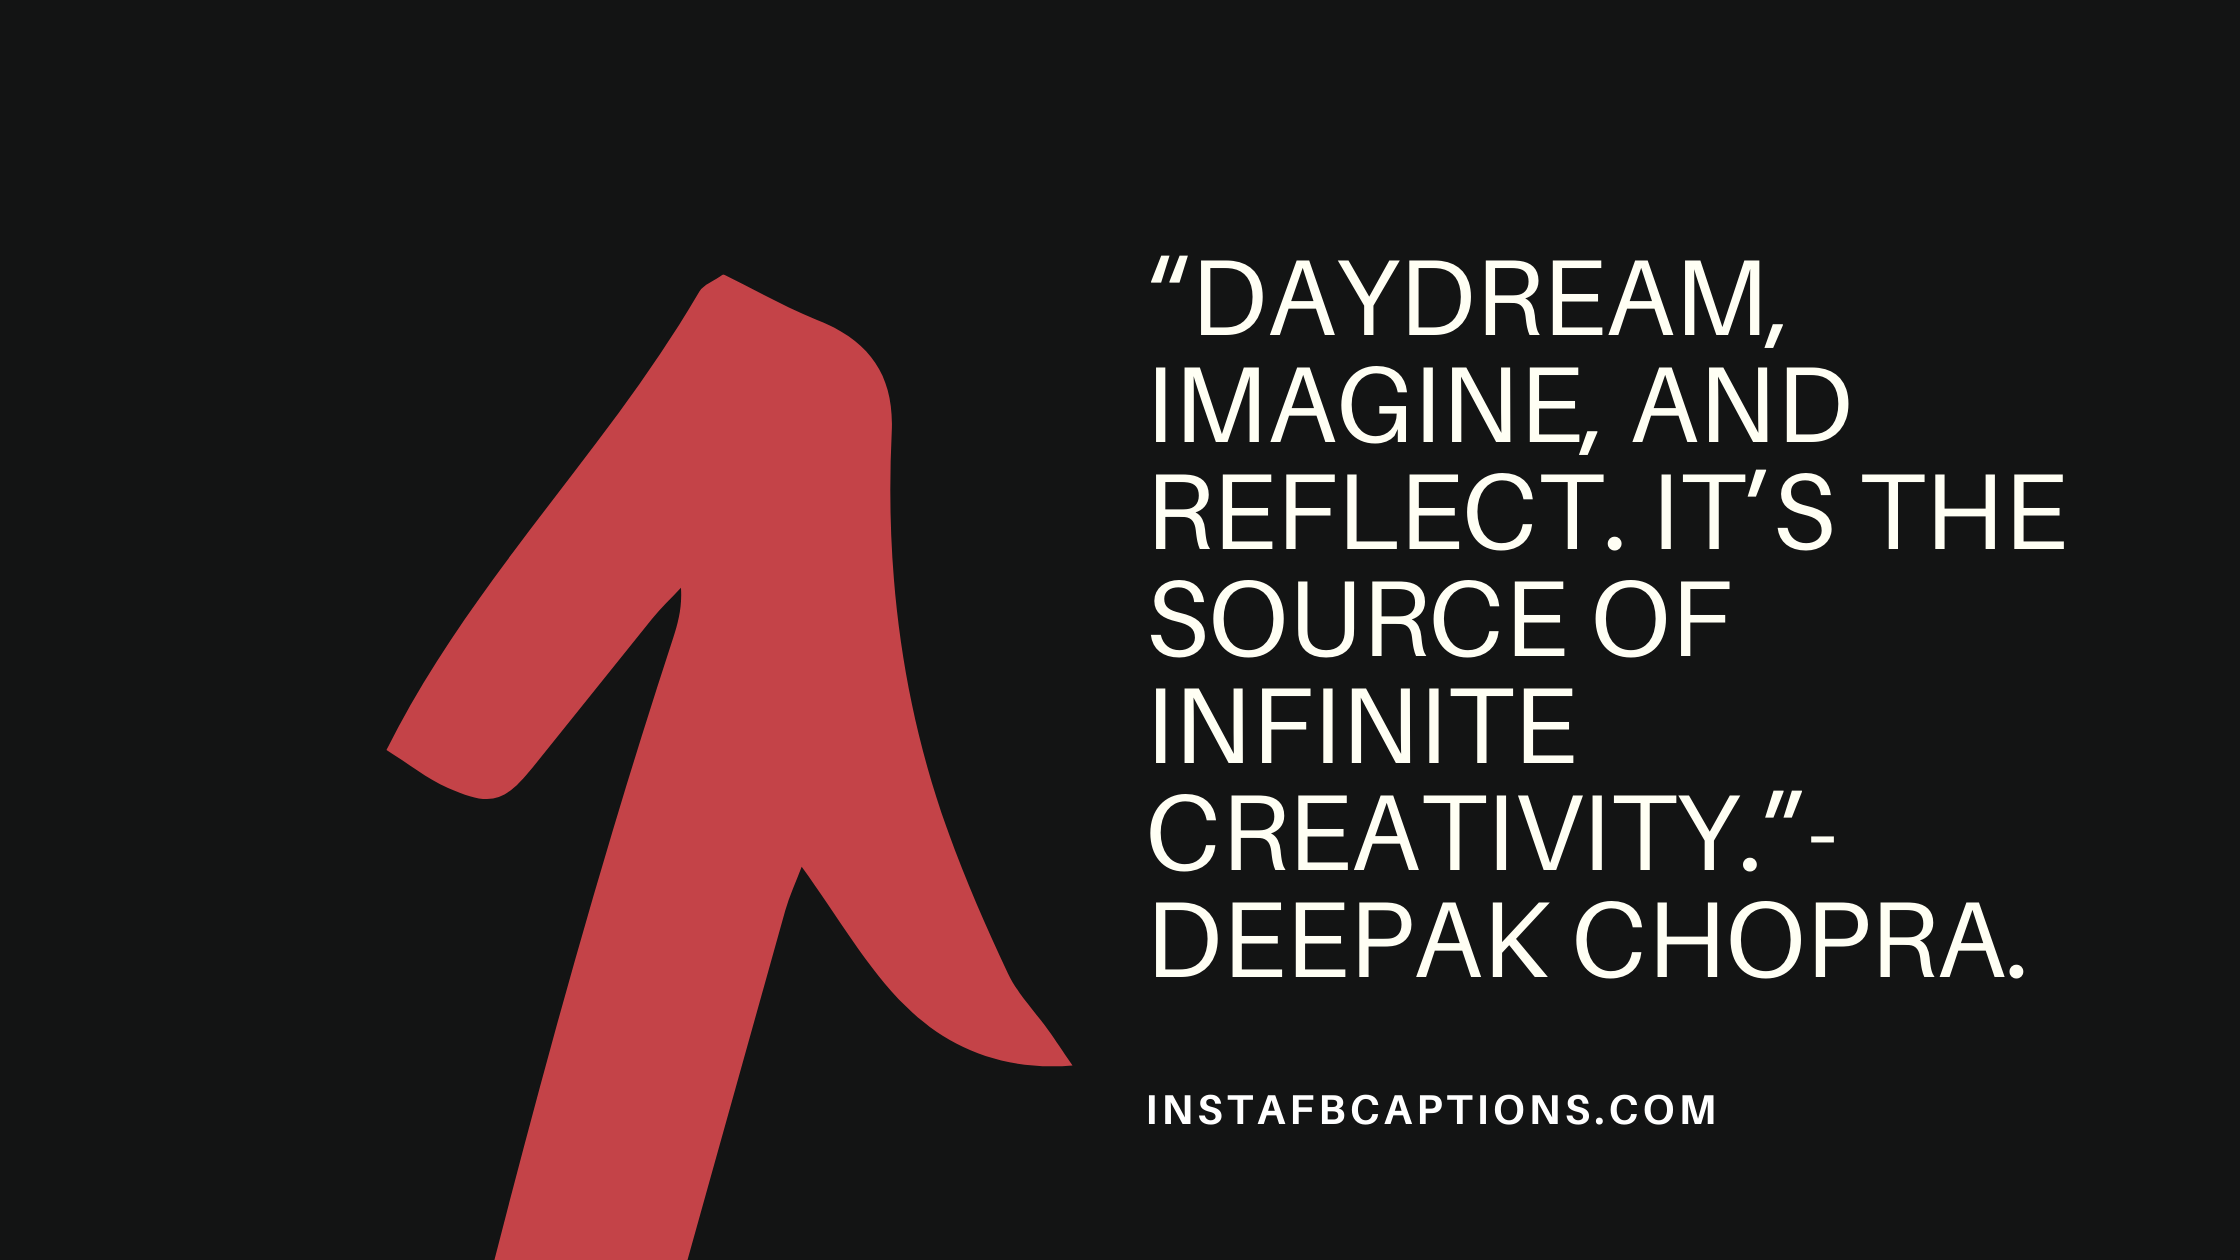 "Daydream, imagine, and reflect. It’s the source of infinite creativity." - Deepak Chopra  - Daydream Quotes - 85 Dream Captions &#038; Quotes For Instagram in 2023